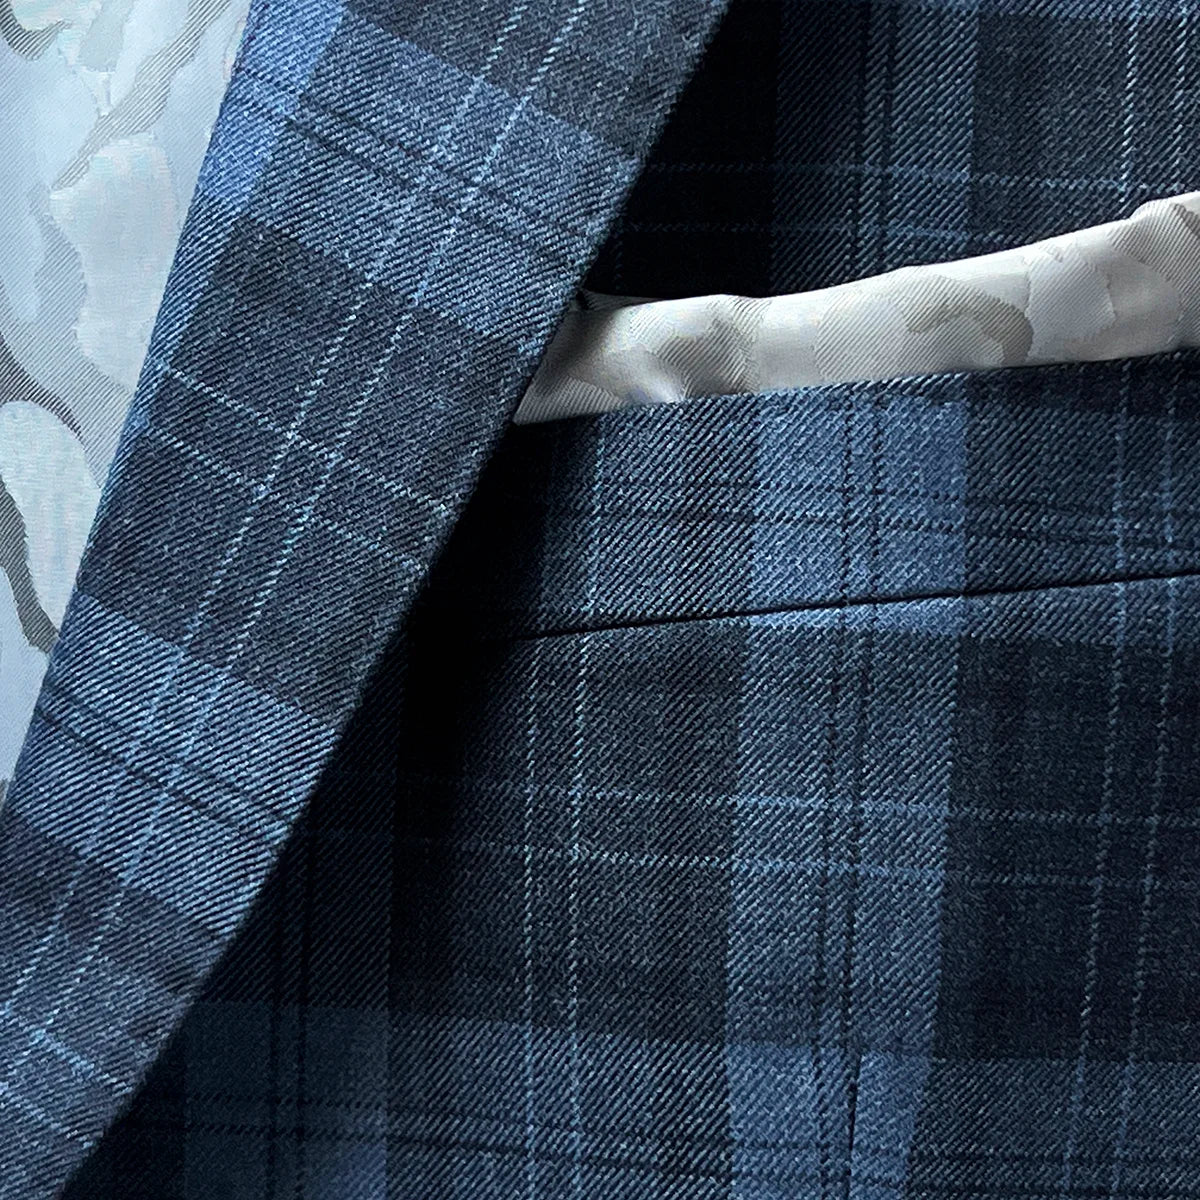 Pocket square on a Prussian Blue sportcoat with black grid checks.